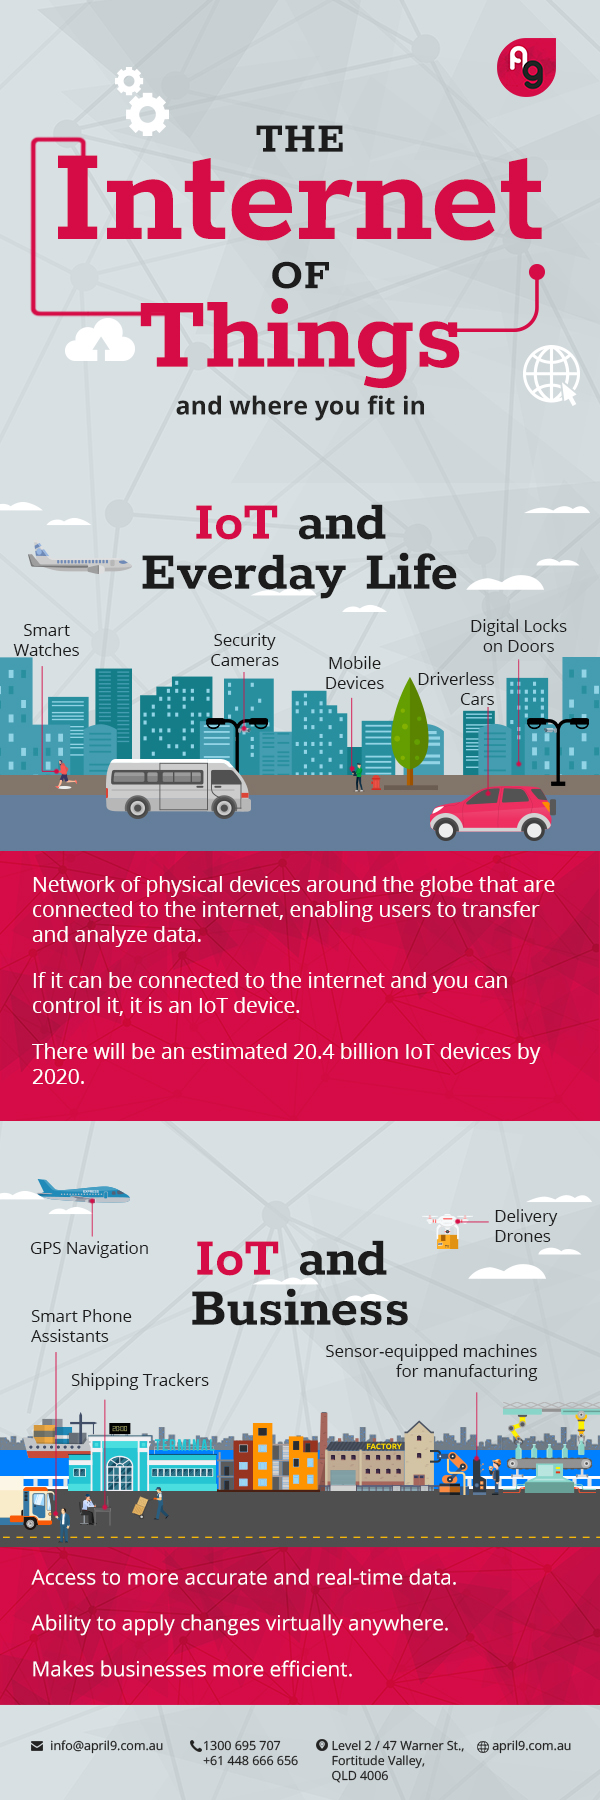 Internet of things infographic │ April9, Brisbane | Software and App Development